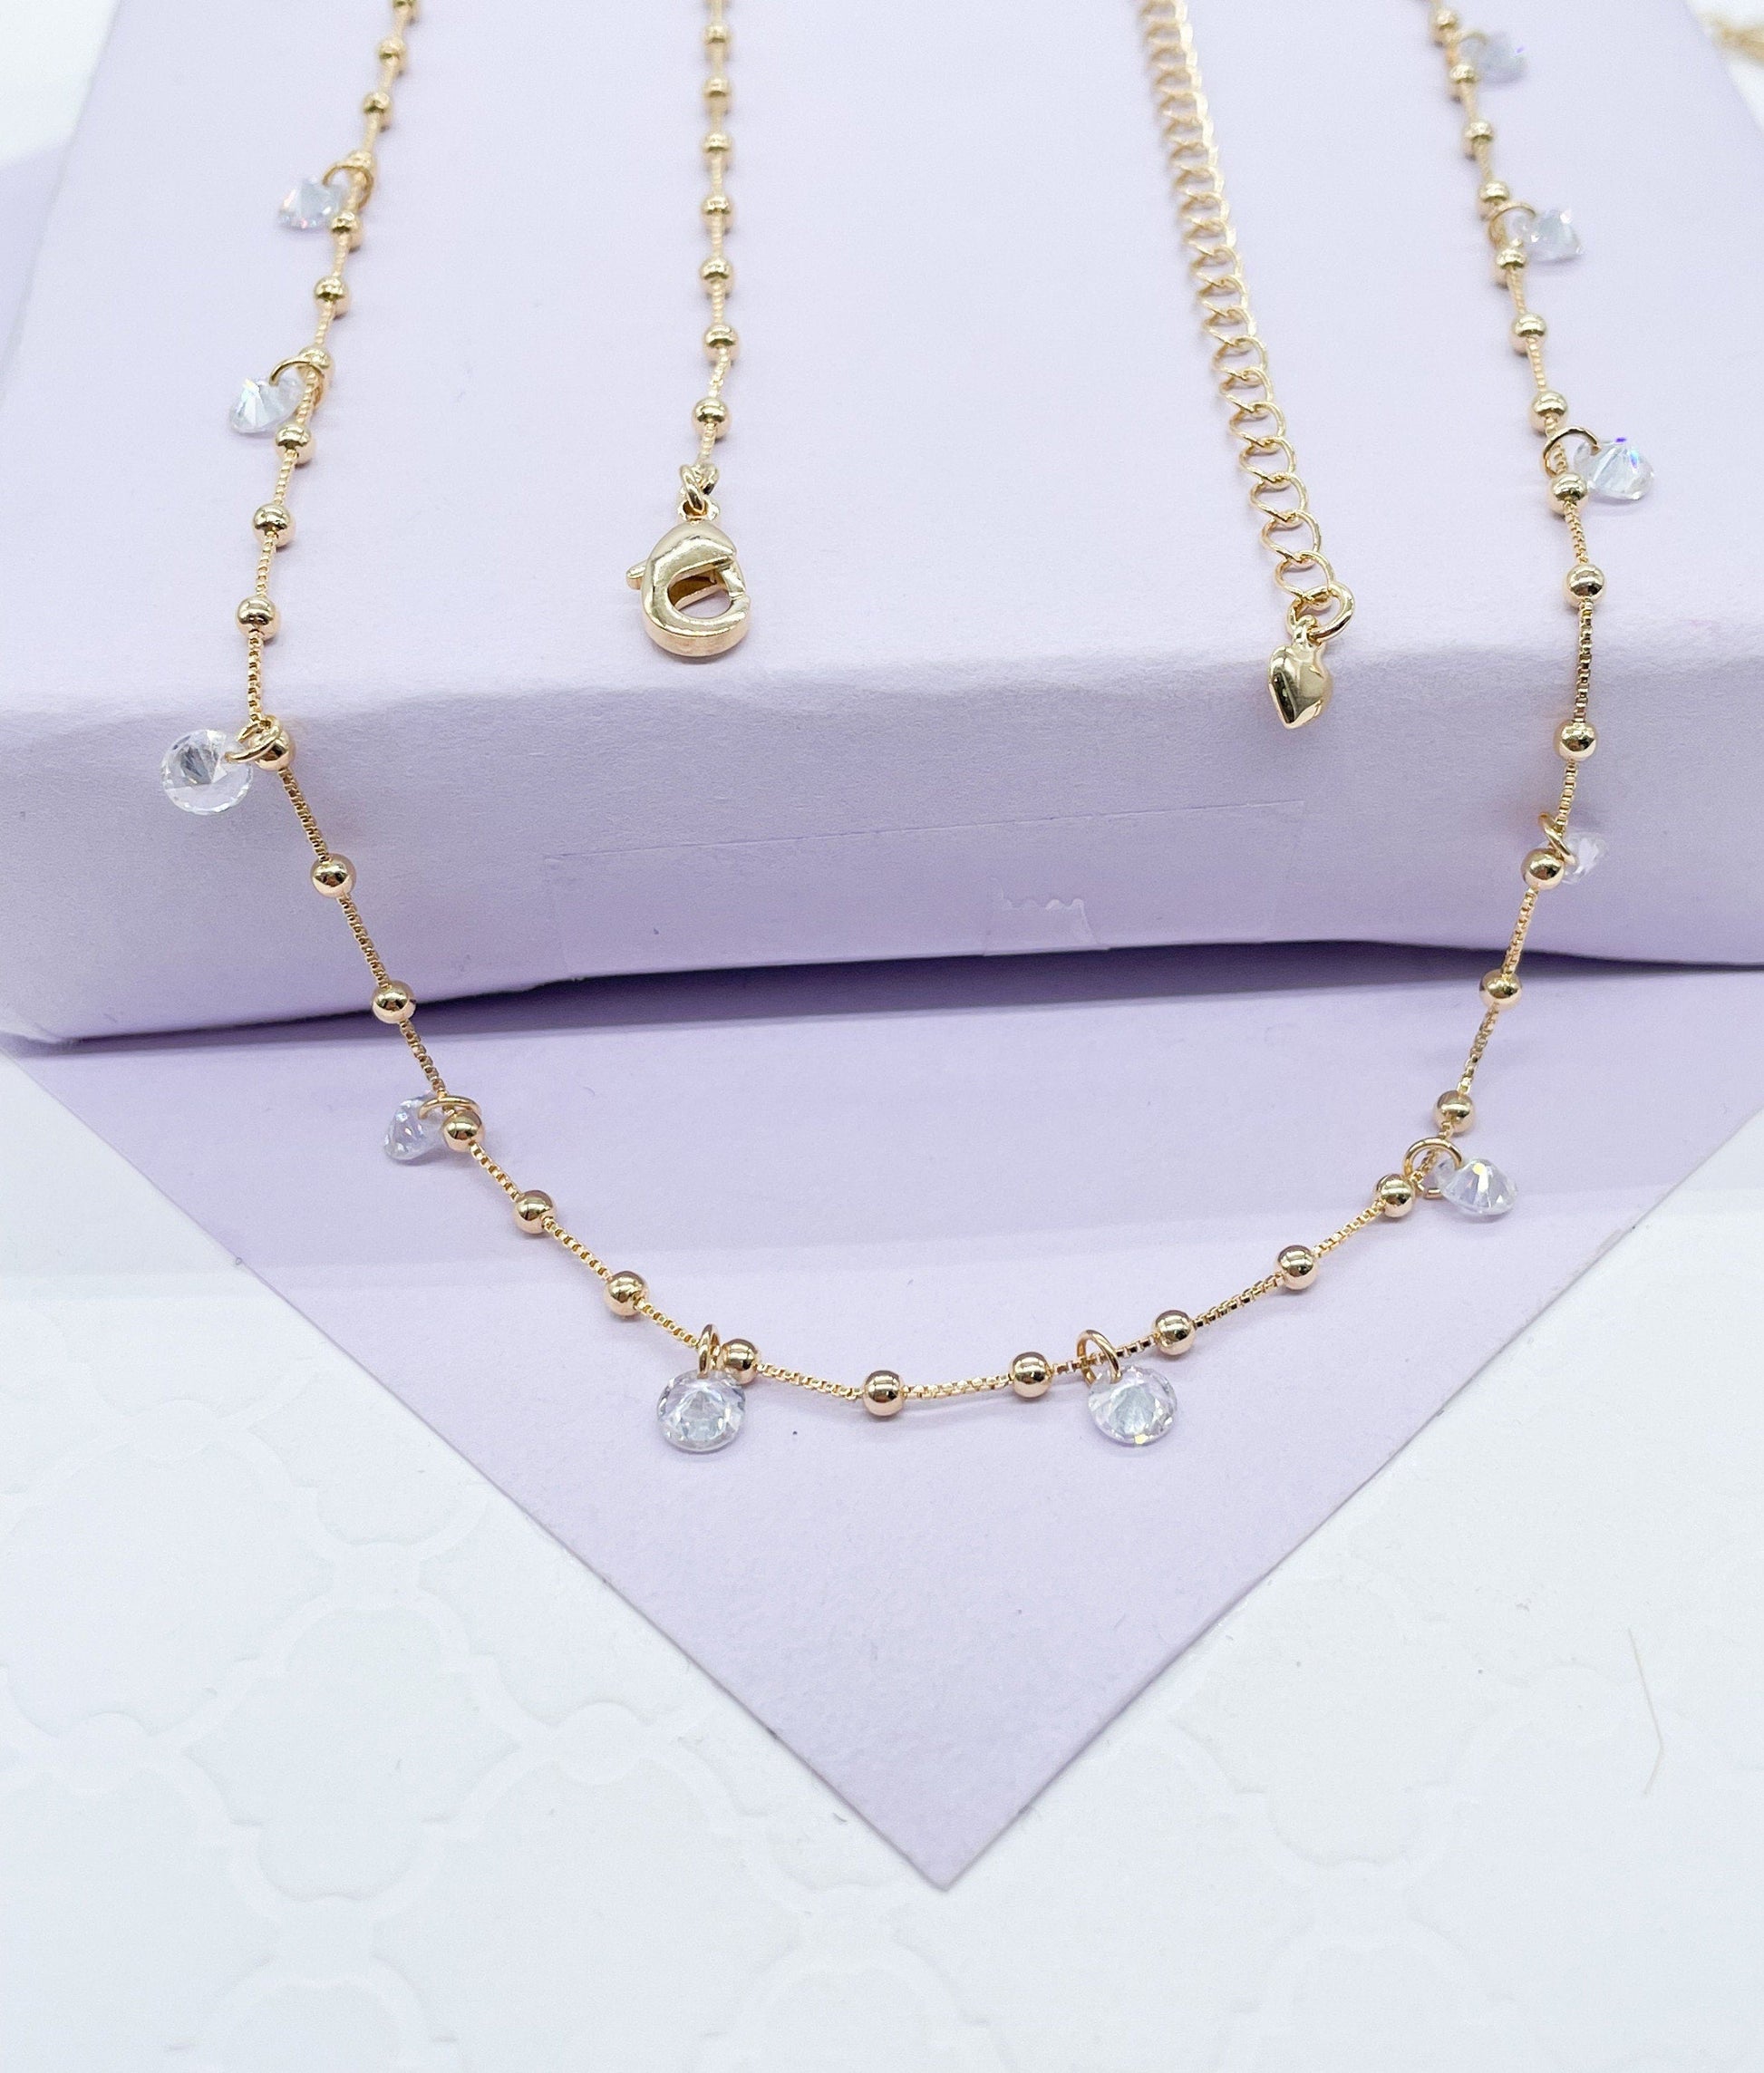 18k Gold Filled Sophisticated Satellite Choker With Dangling CZ Stones